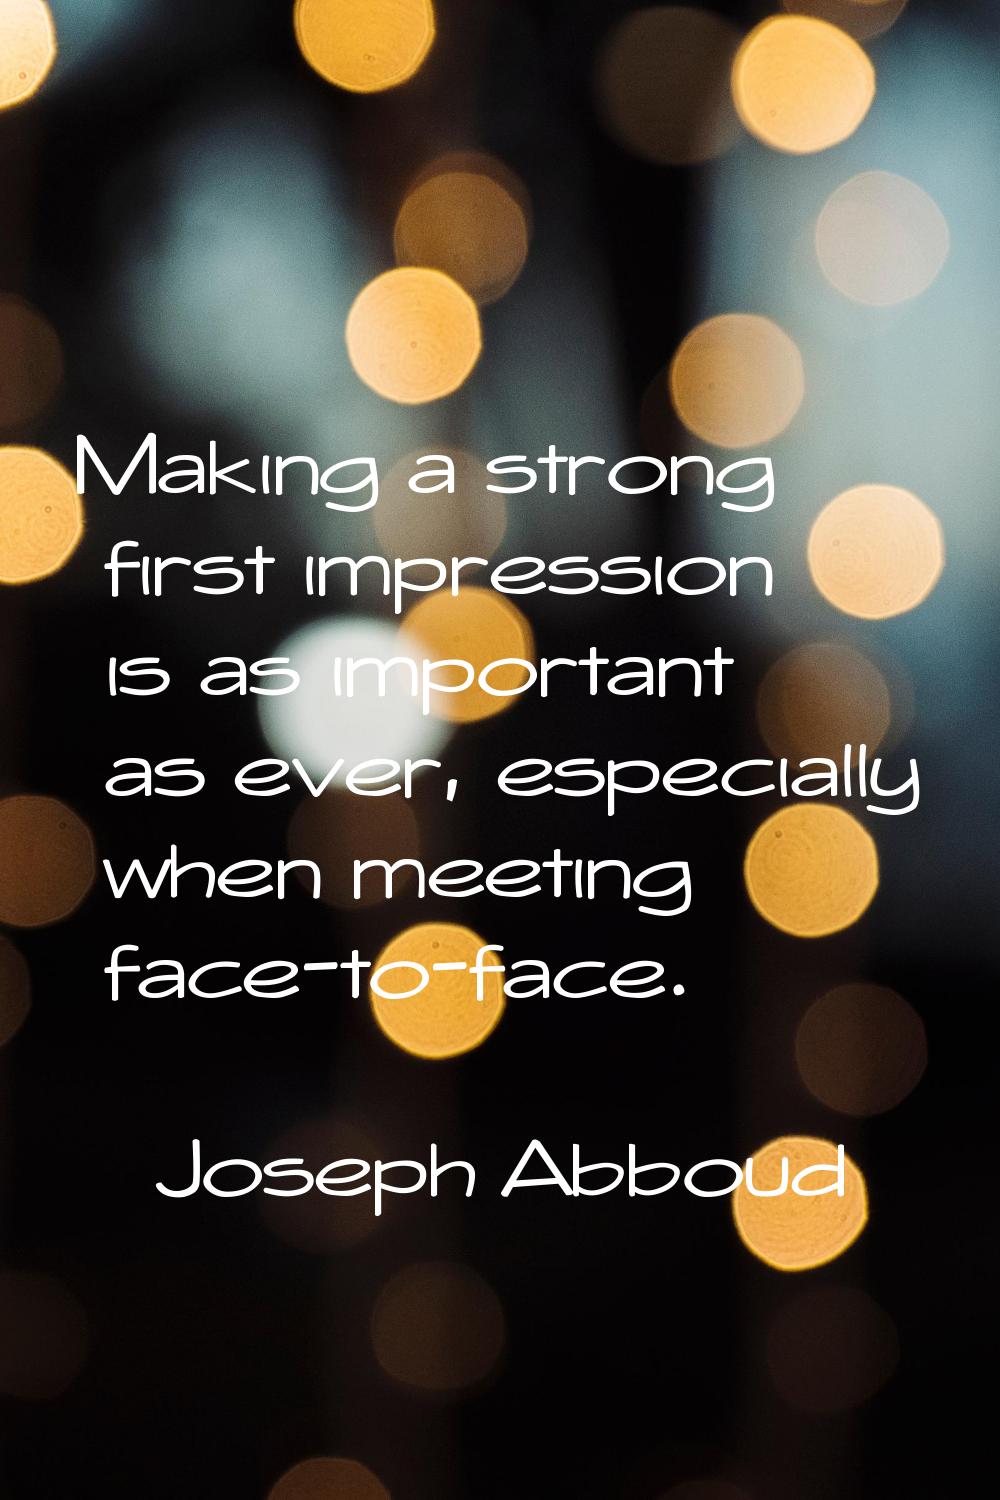 Making a strong first impression is as important as ever, especially when meeting face-to-face.